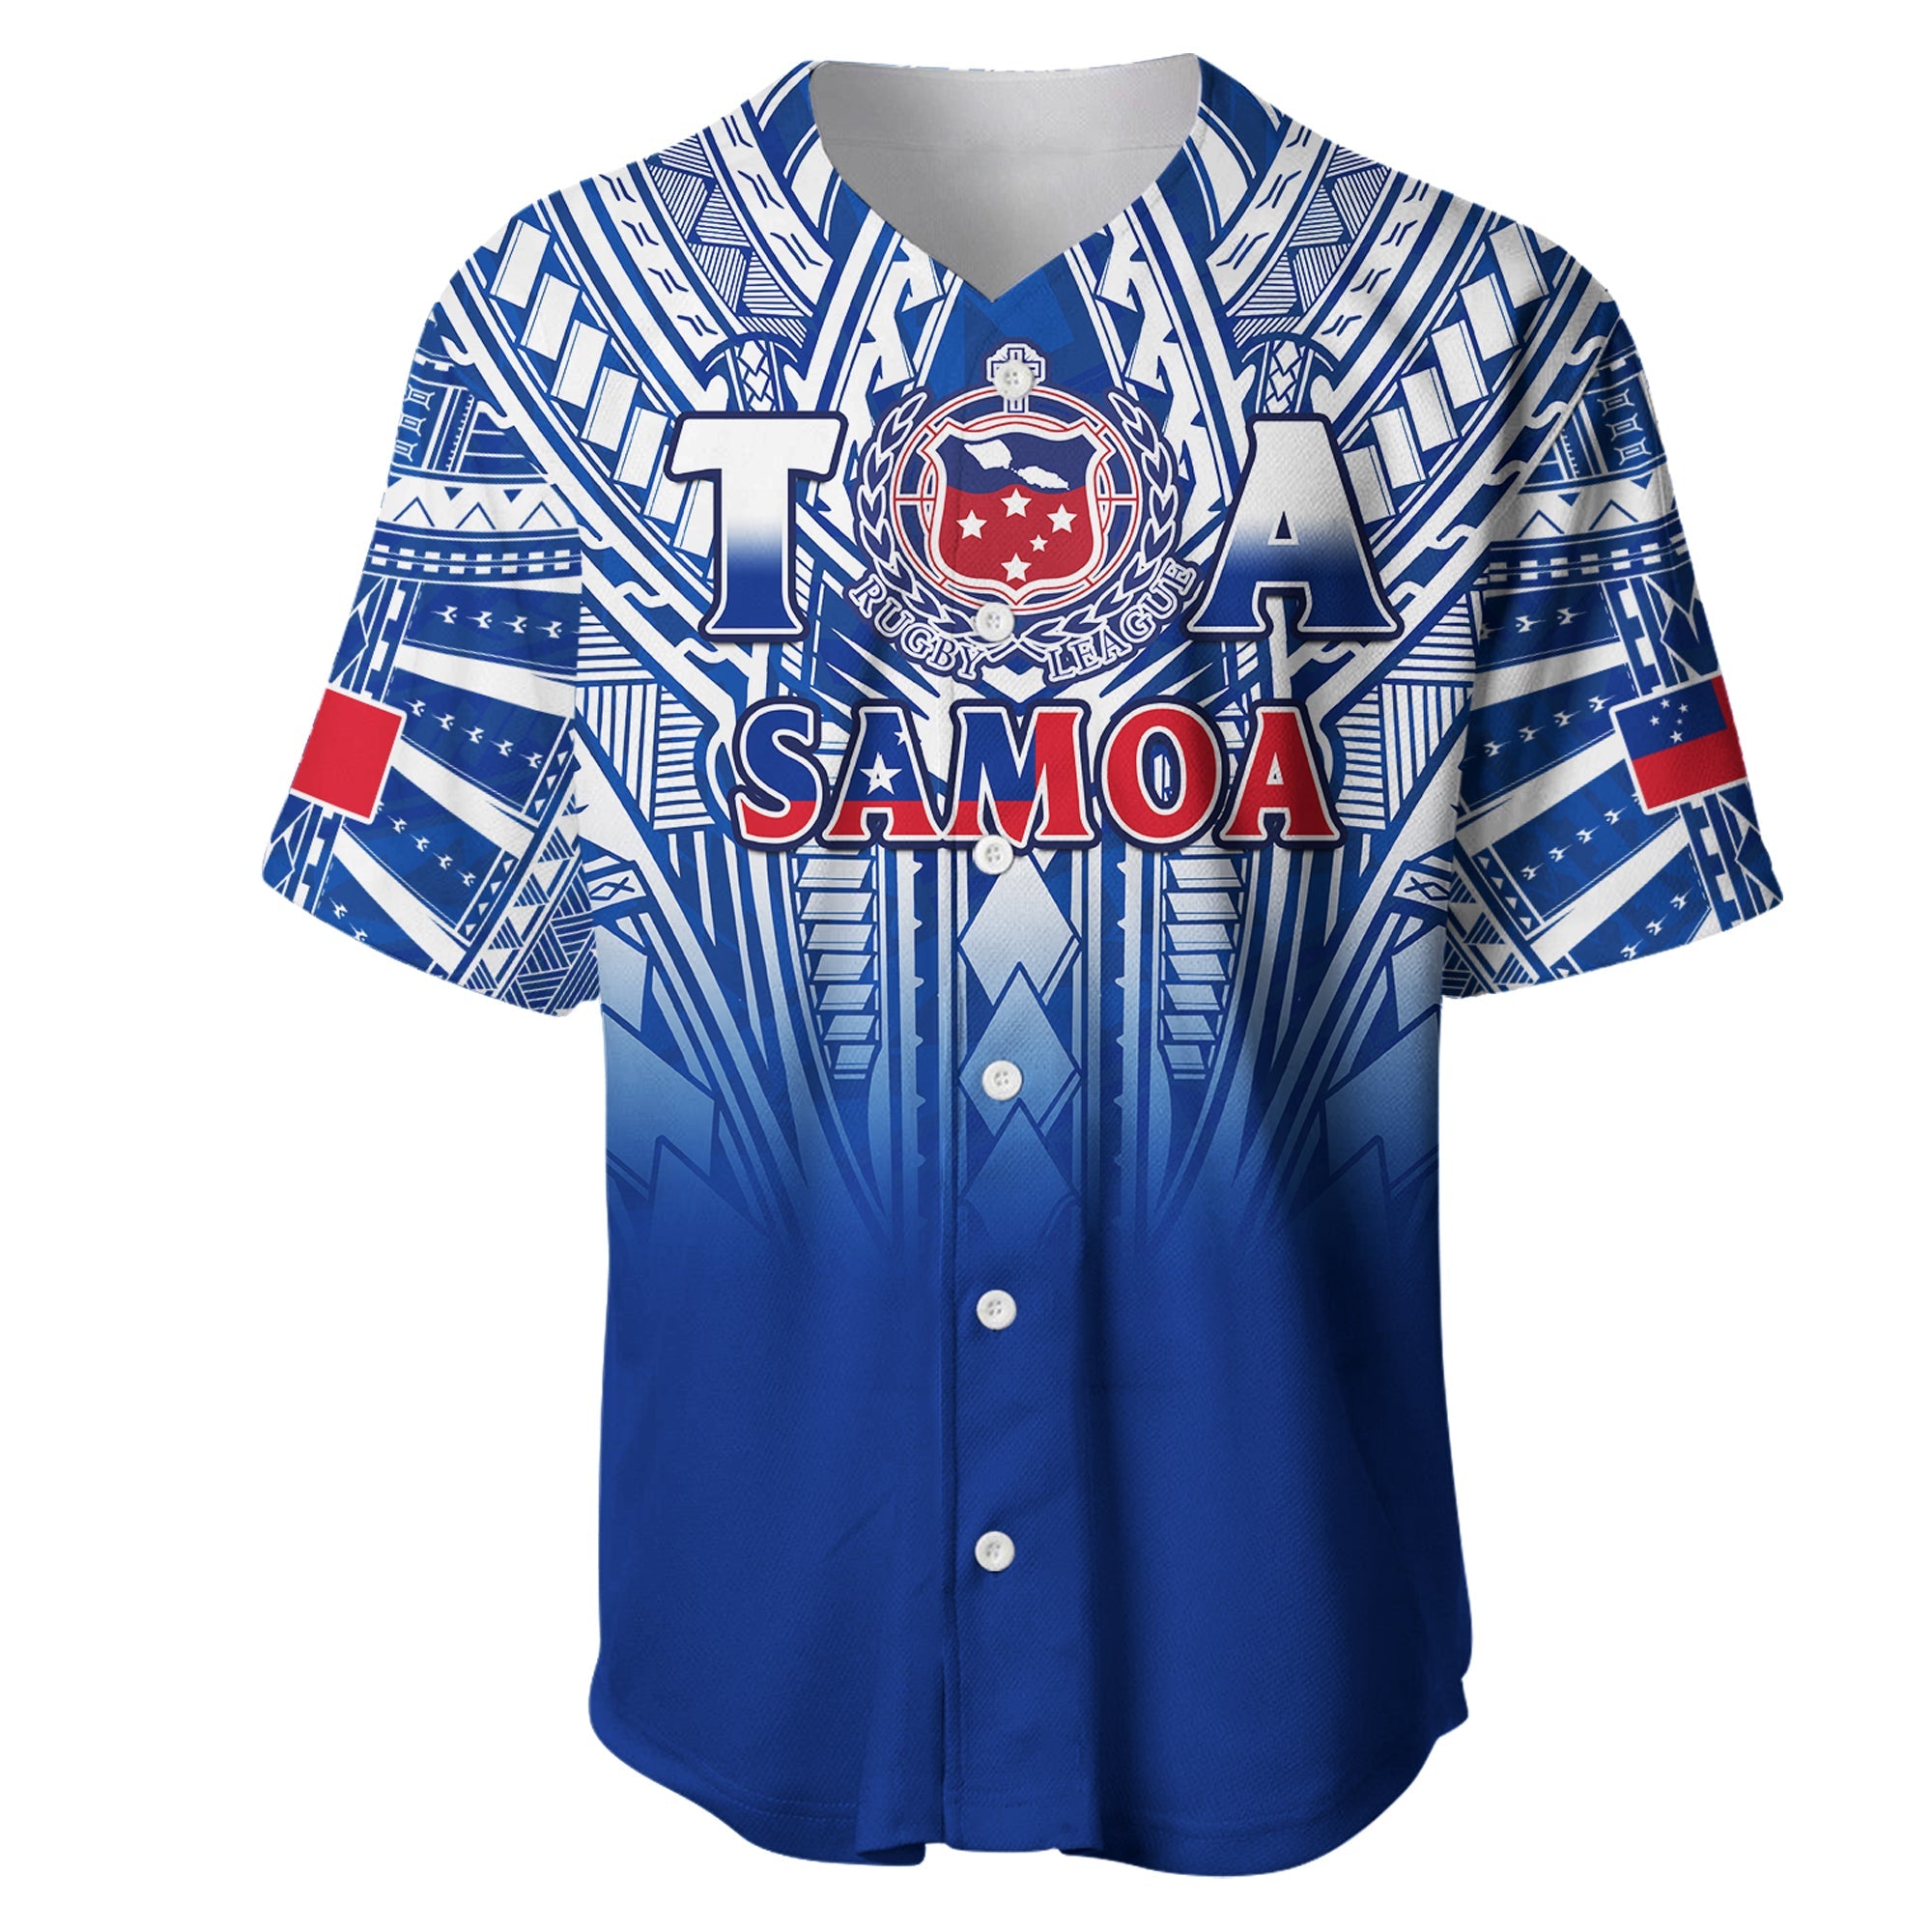 (Custom Text And Number) Samoa Rugby Baseball Jersey Personalise Toa Samoa Polynesian Pacific Navy Version LT14 Blue - Polynesian Pride